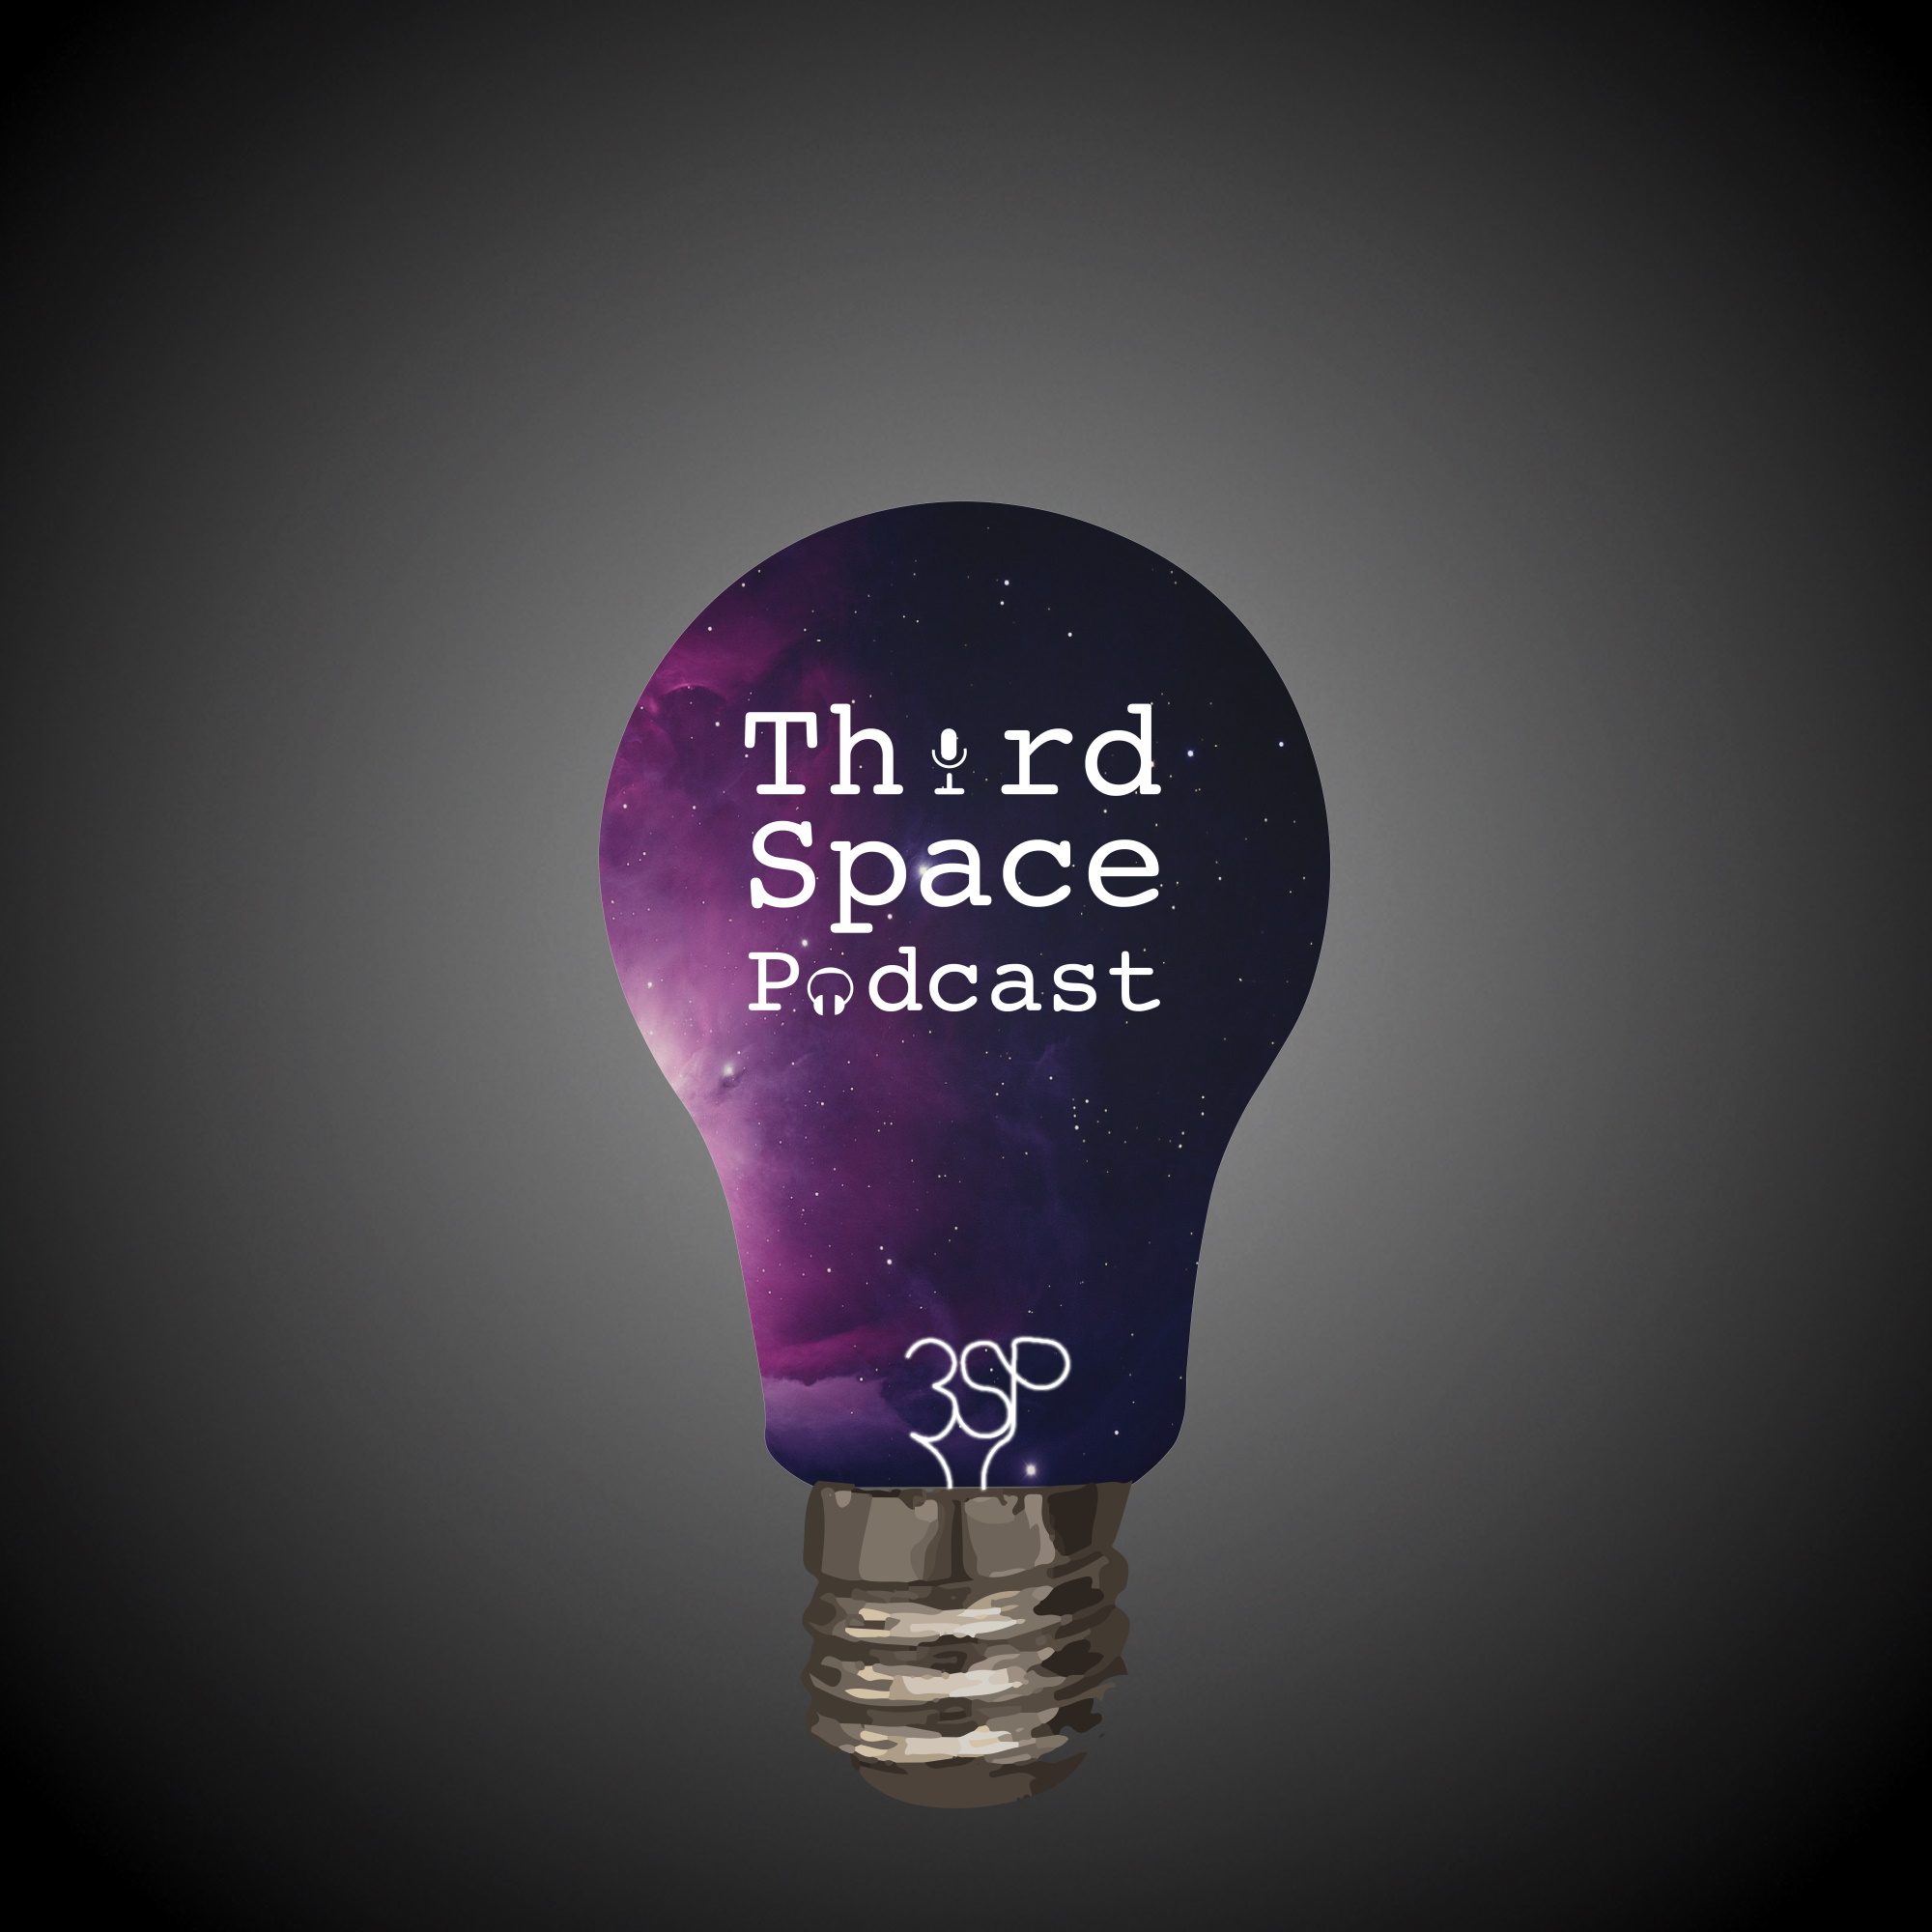 Third Space Podcast